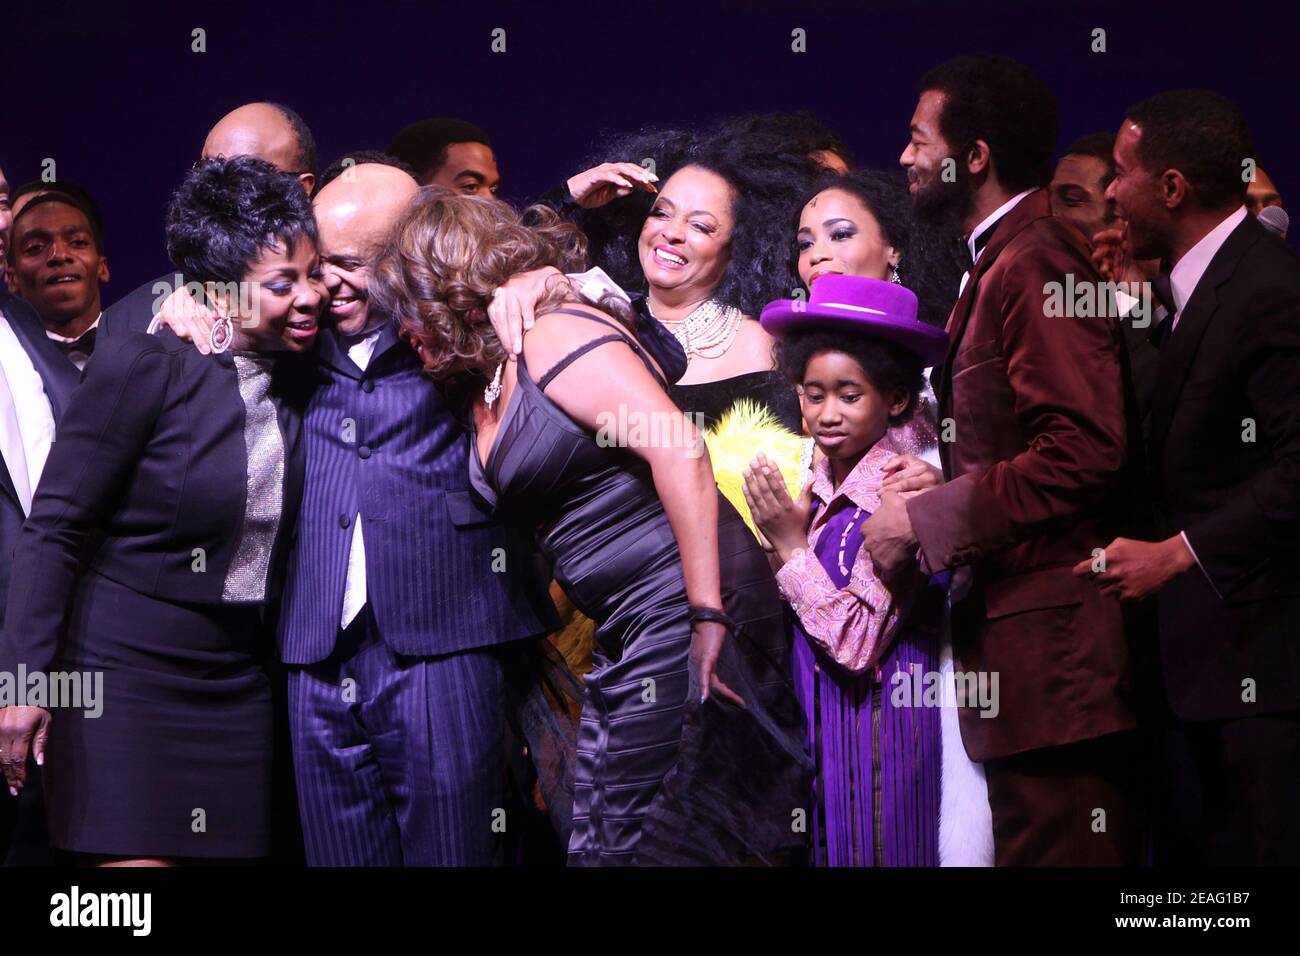 NEW YORK, NY- APRIL 14: Gladys Knight, Berry Gordy, Mary Wilson, Diana Ross, Valisia LeKae, Raymond Luke Jr., and Brandon Victor Dixon during the opening night curtain call for Motown, held at the Lunt-Fontanne Theatre, on April 14, 2013, in New York City. Credit: Joseph Marzullo/MediaPunch Stock Photo